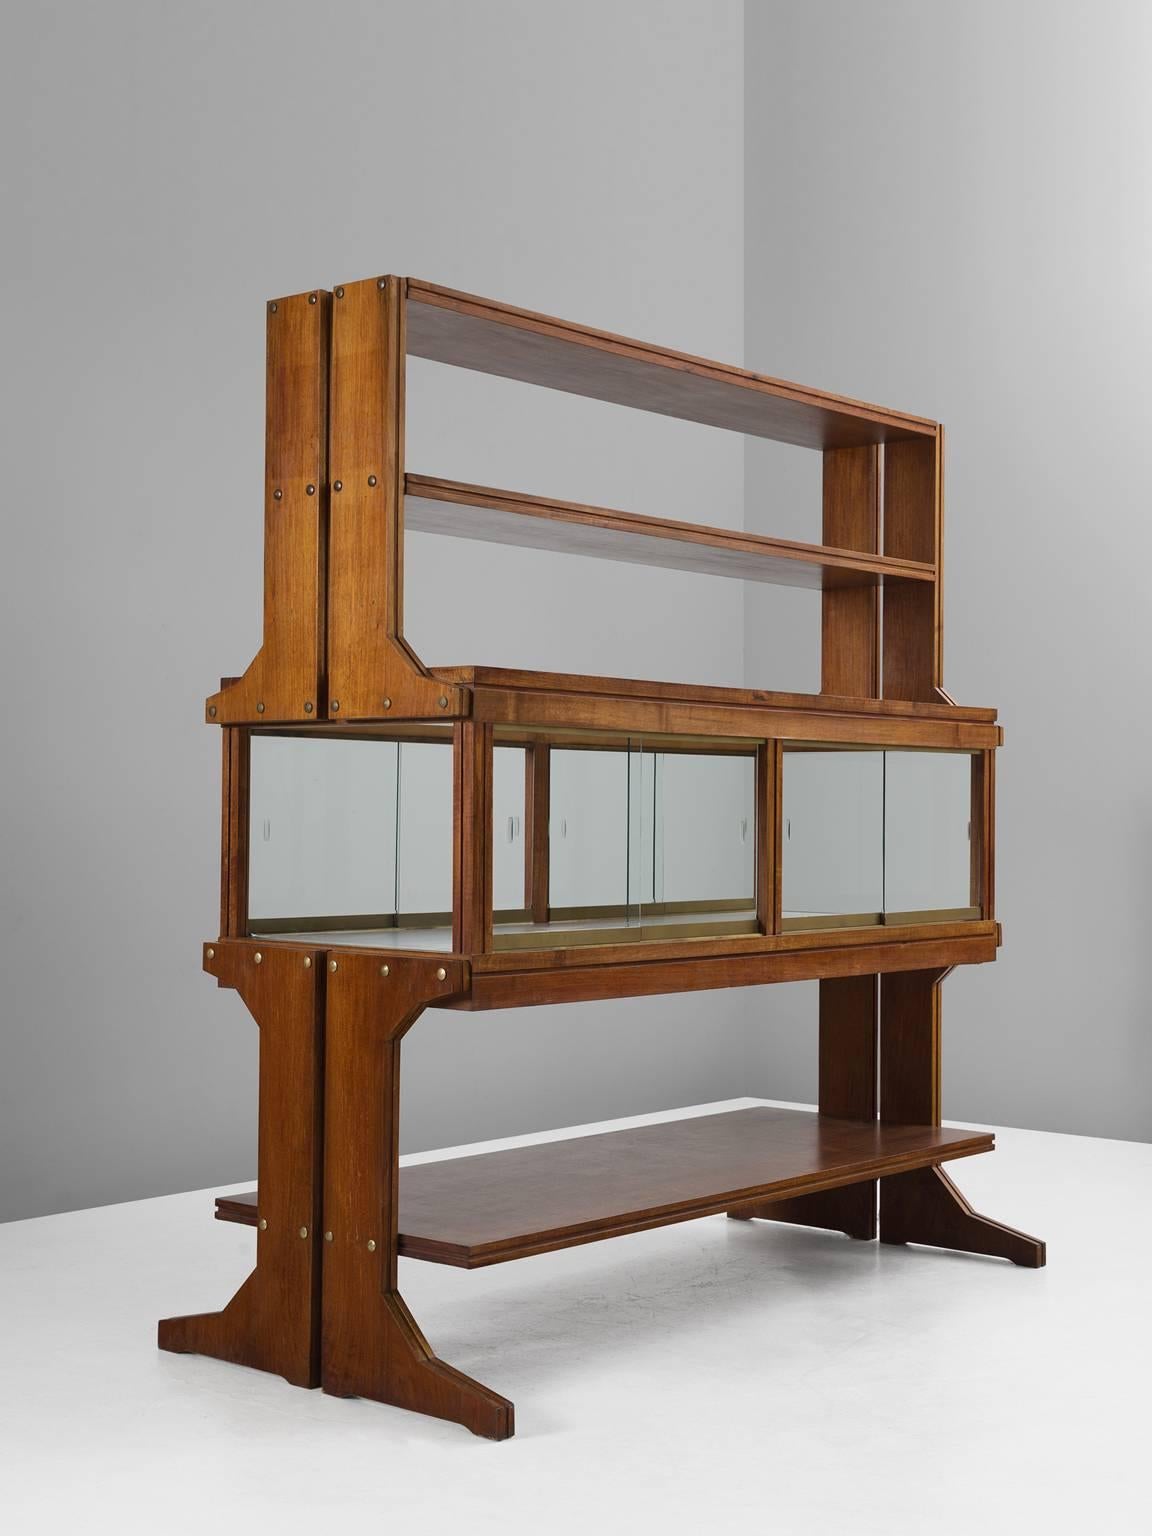 Showcase, in walnut, glass and brass, Italy 1960s.

Large vitrine cabinet in walnut. This high showcase offers plenty of storage space to expose your most precious or beautiful treasures. Executed in walnut with elegant brass details. The large